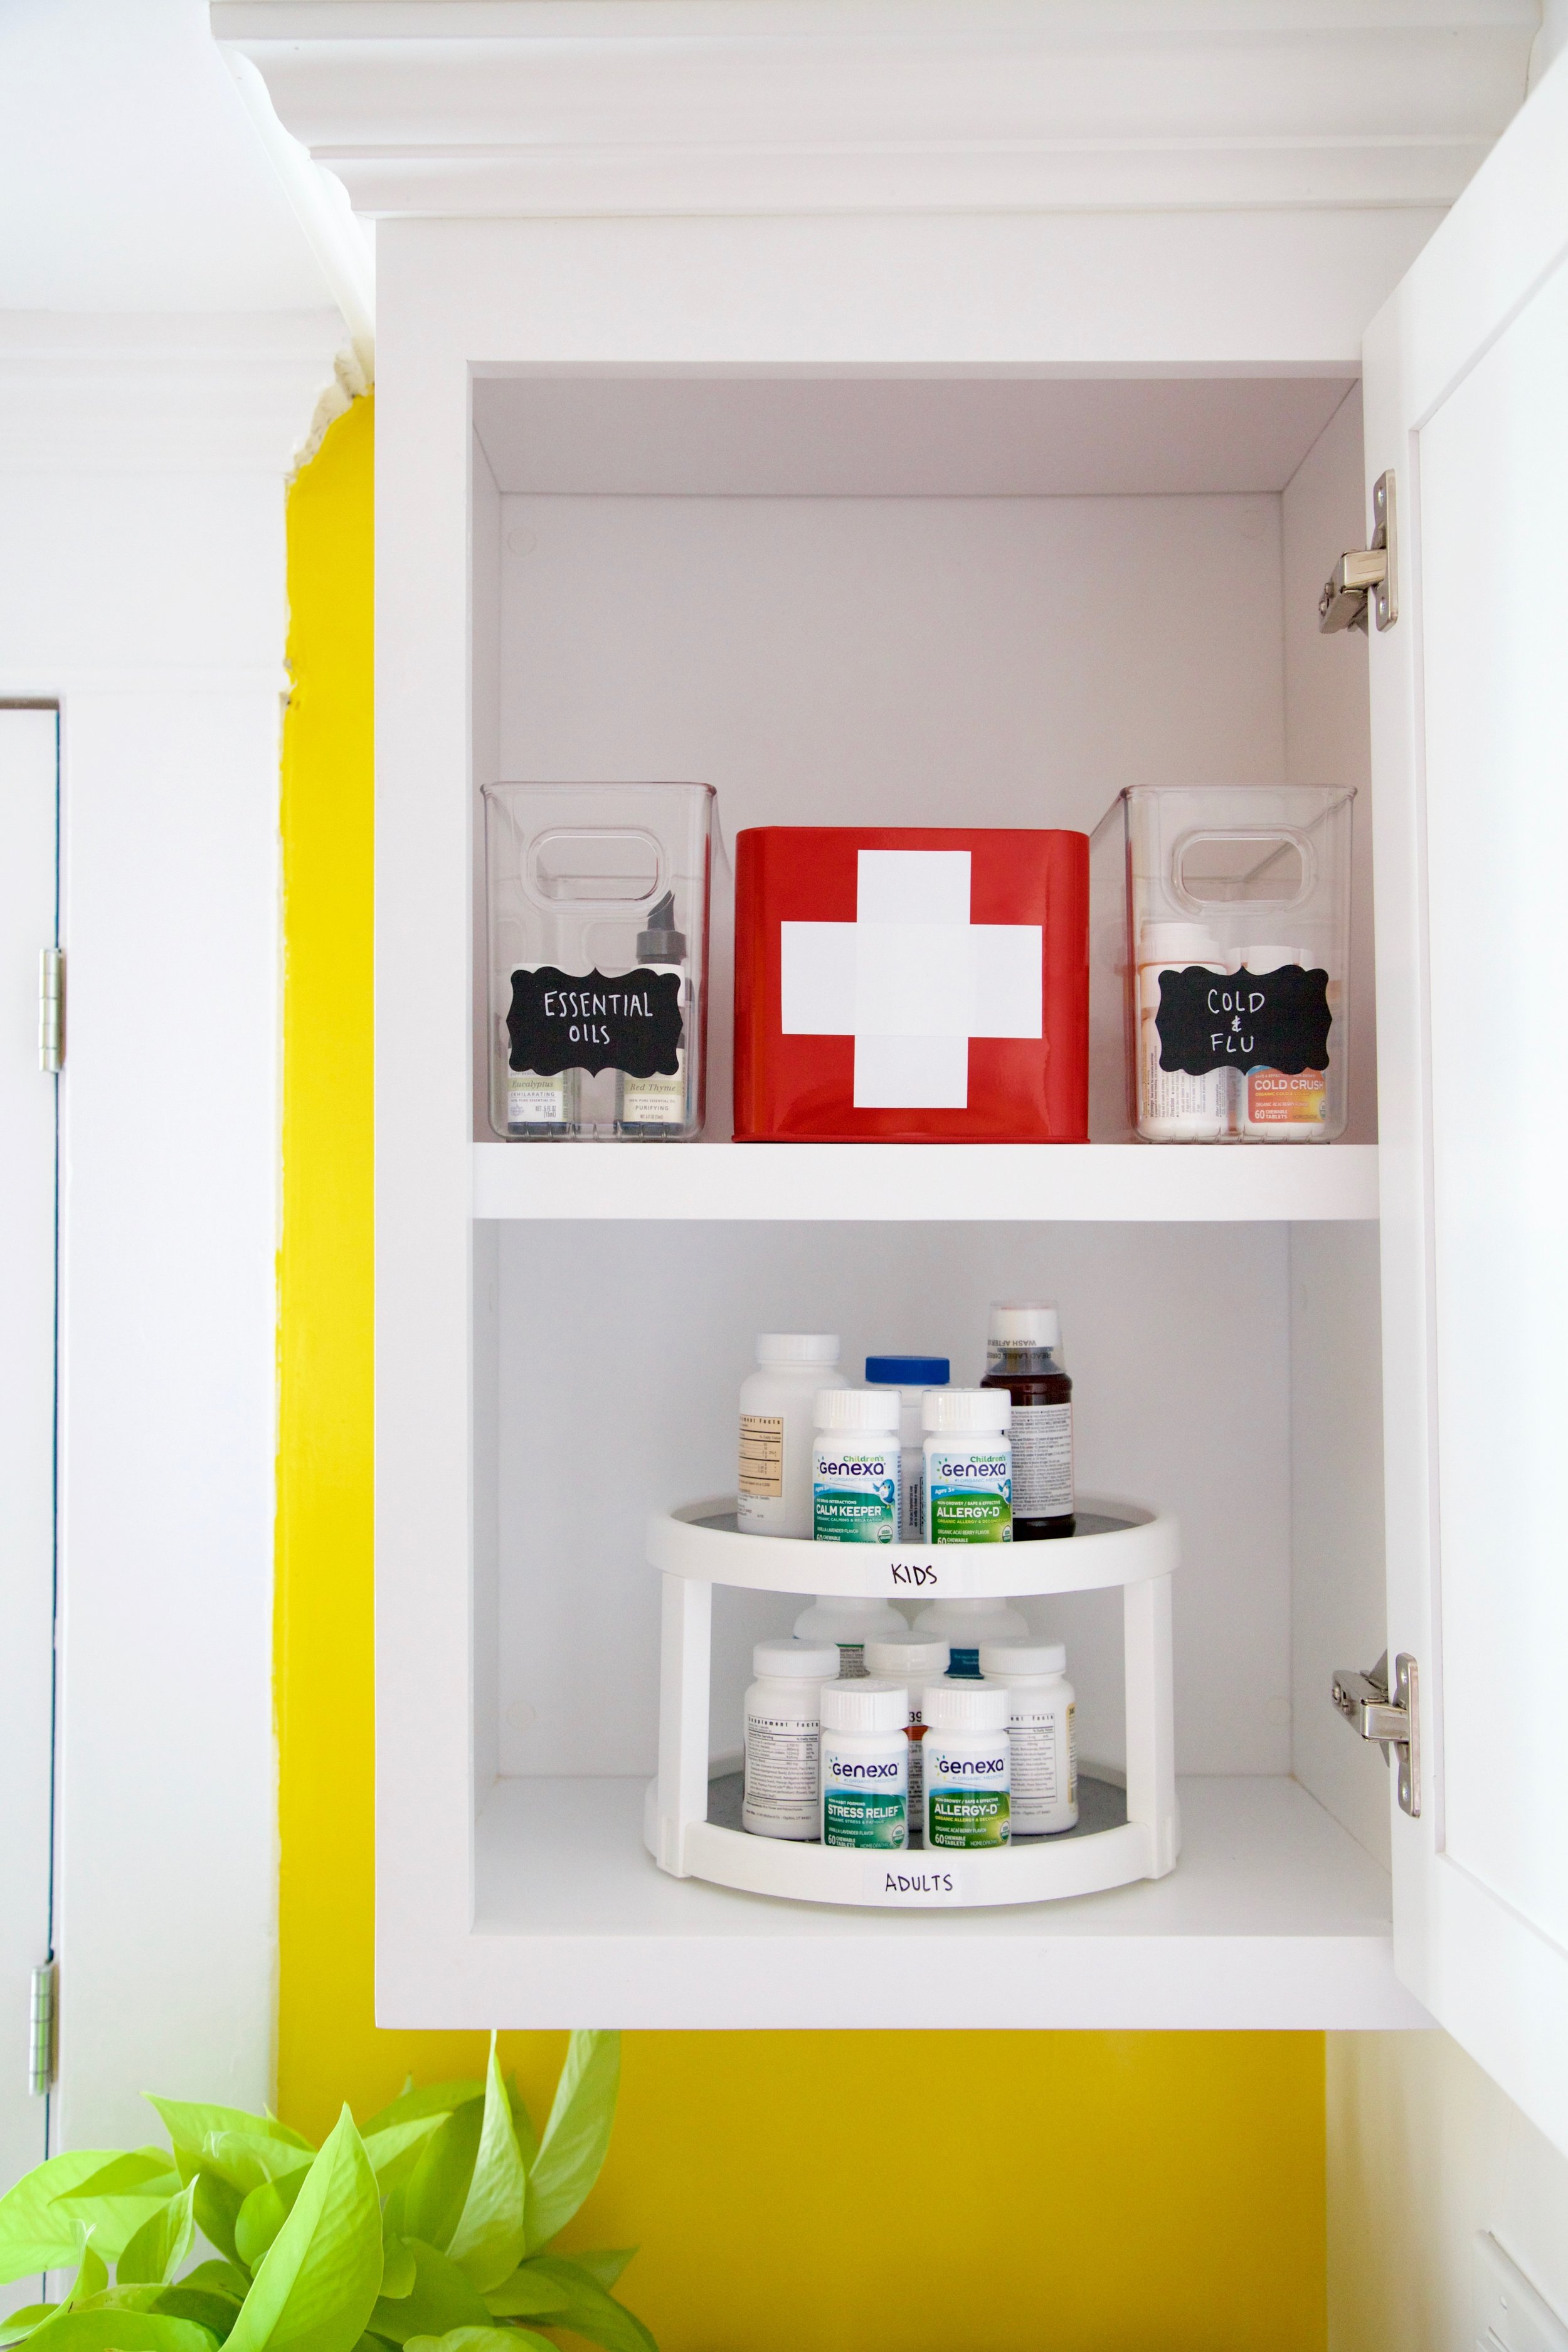 How to organize your medicine/vitamin cabinet - Spicy Shelf 